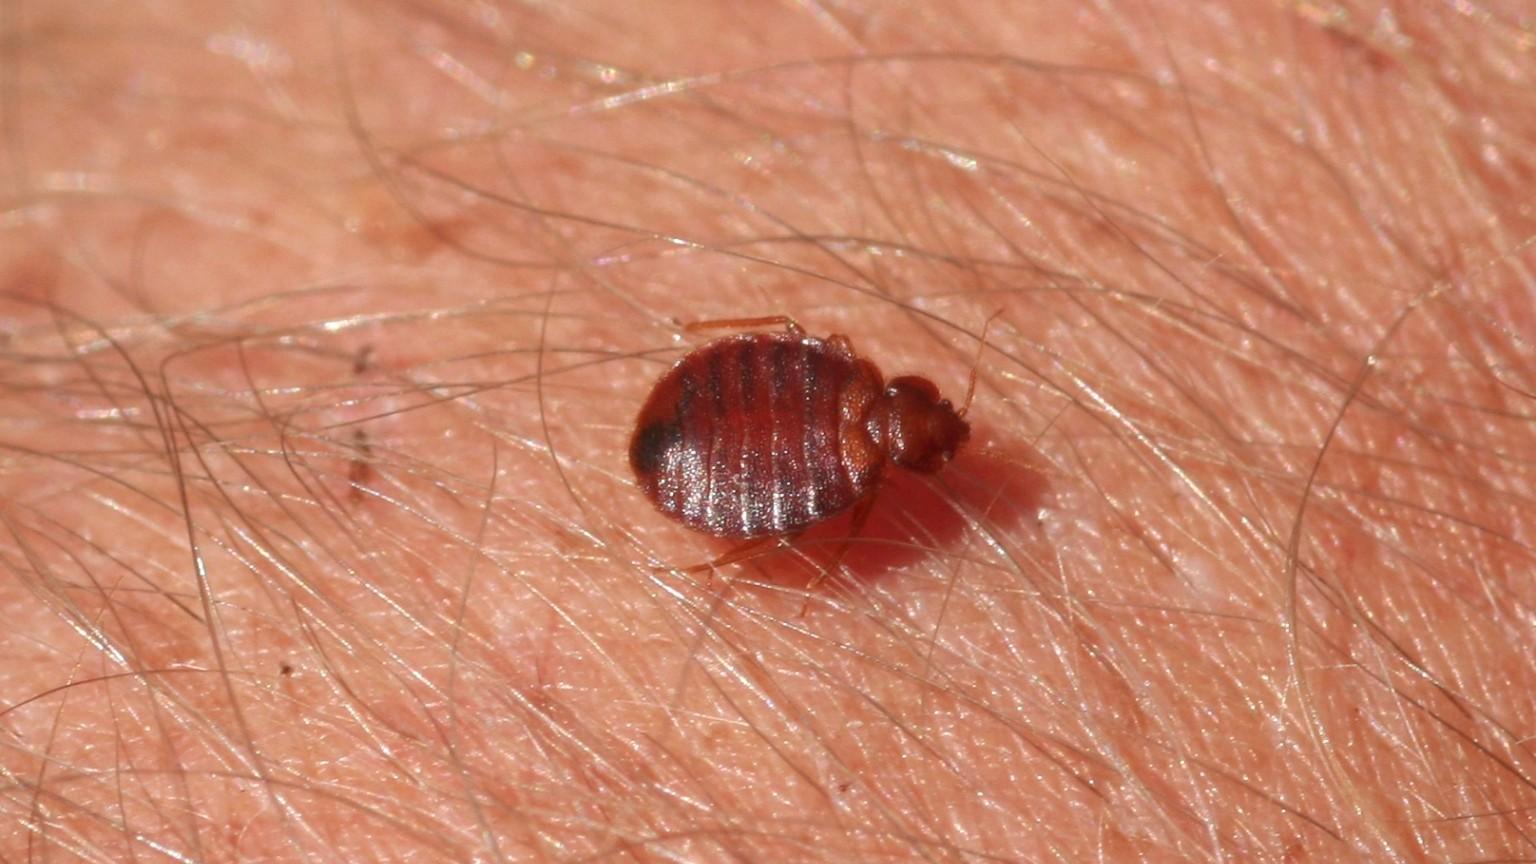 Bedbugs Removal Services in Dubai